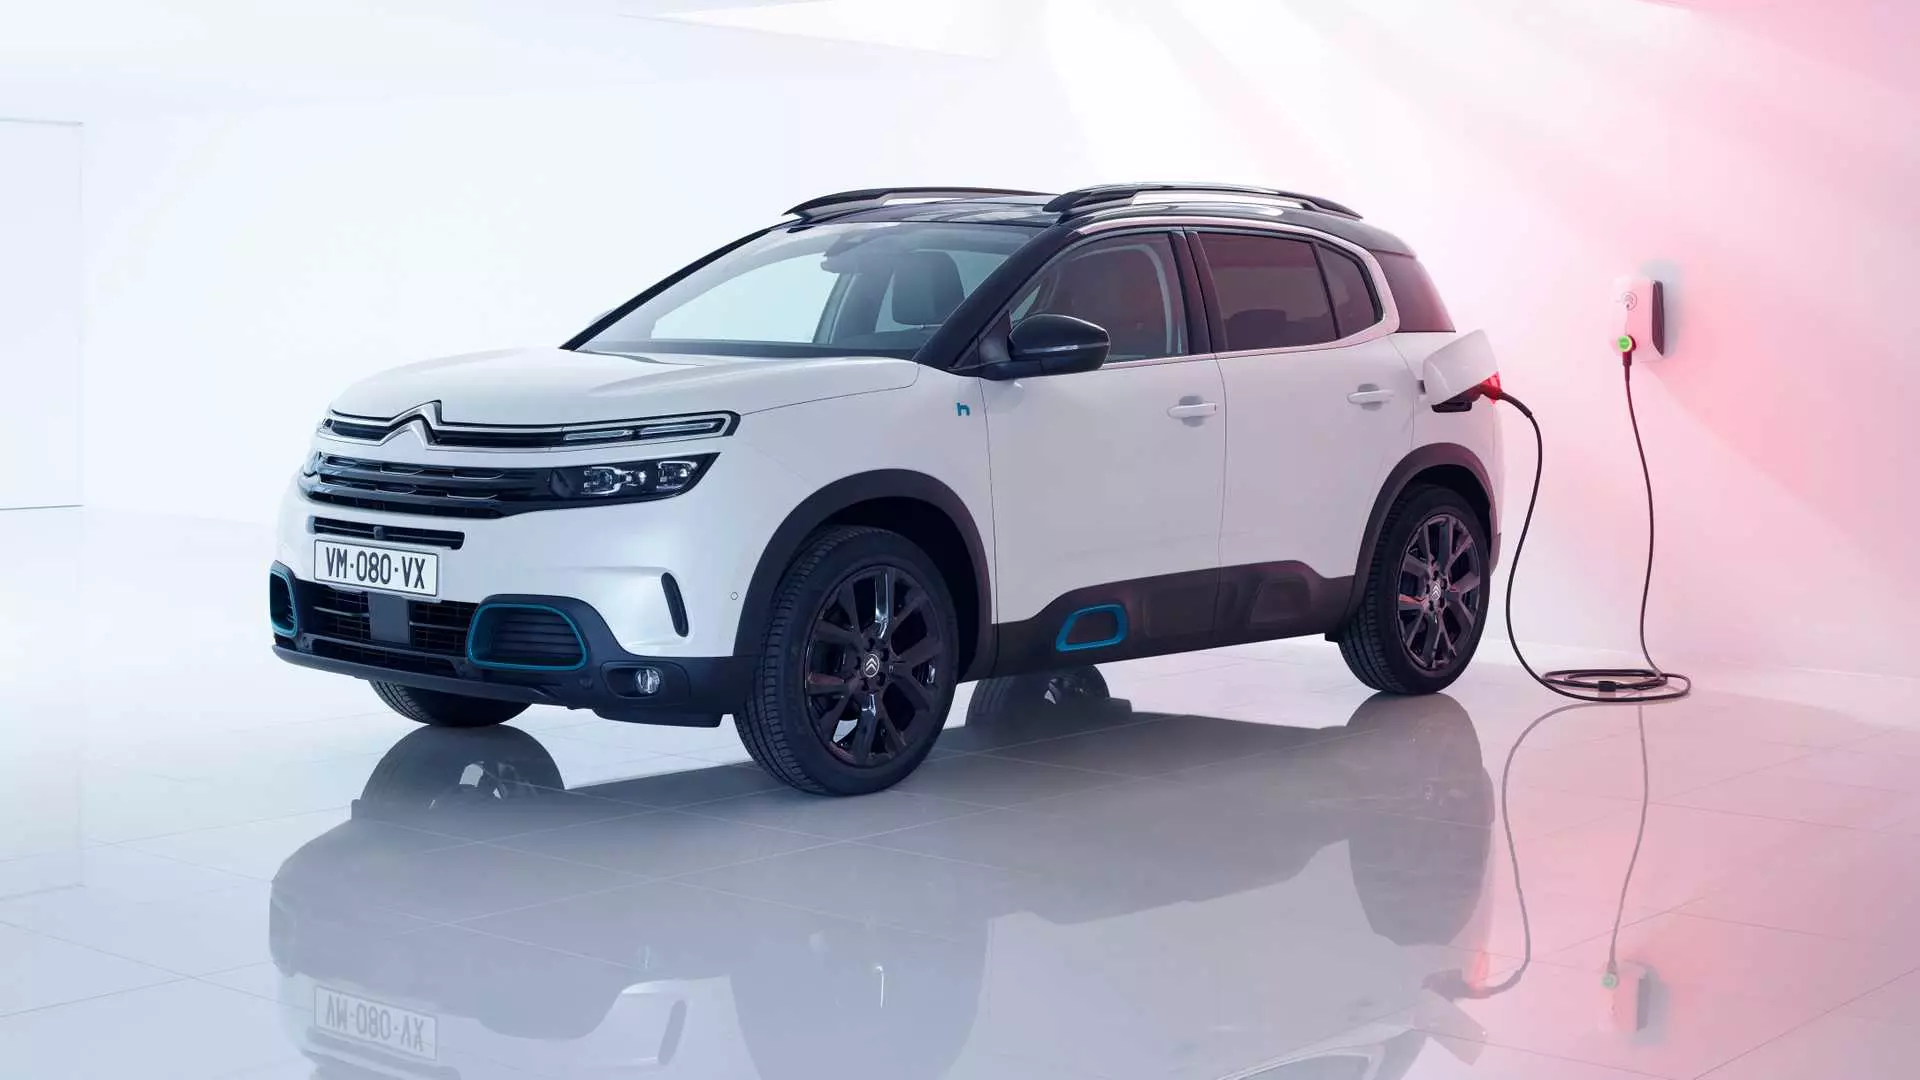 Citroën news for 2022: C5 Aircross facelift and new C4 L